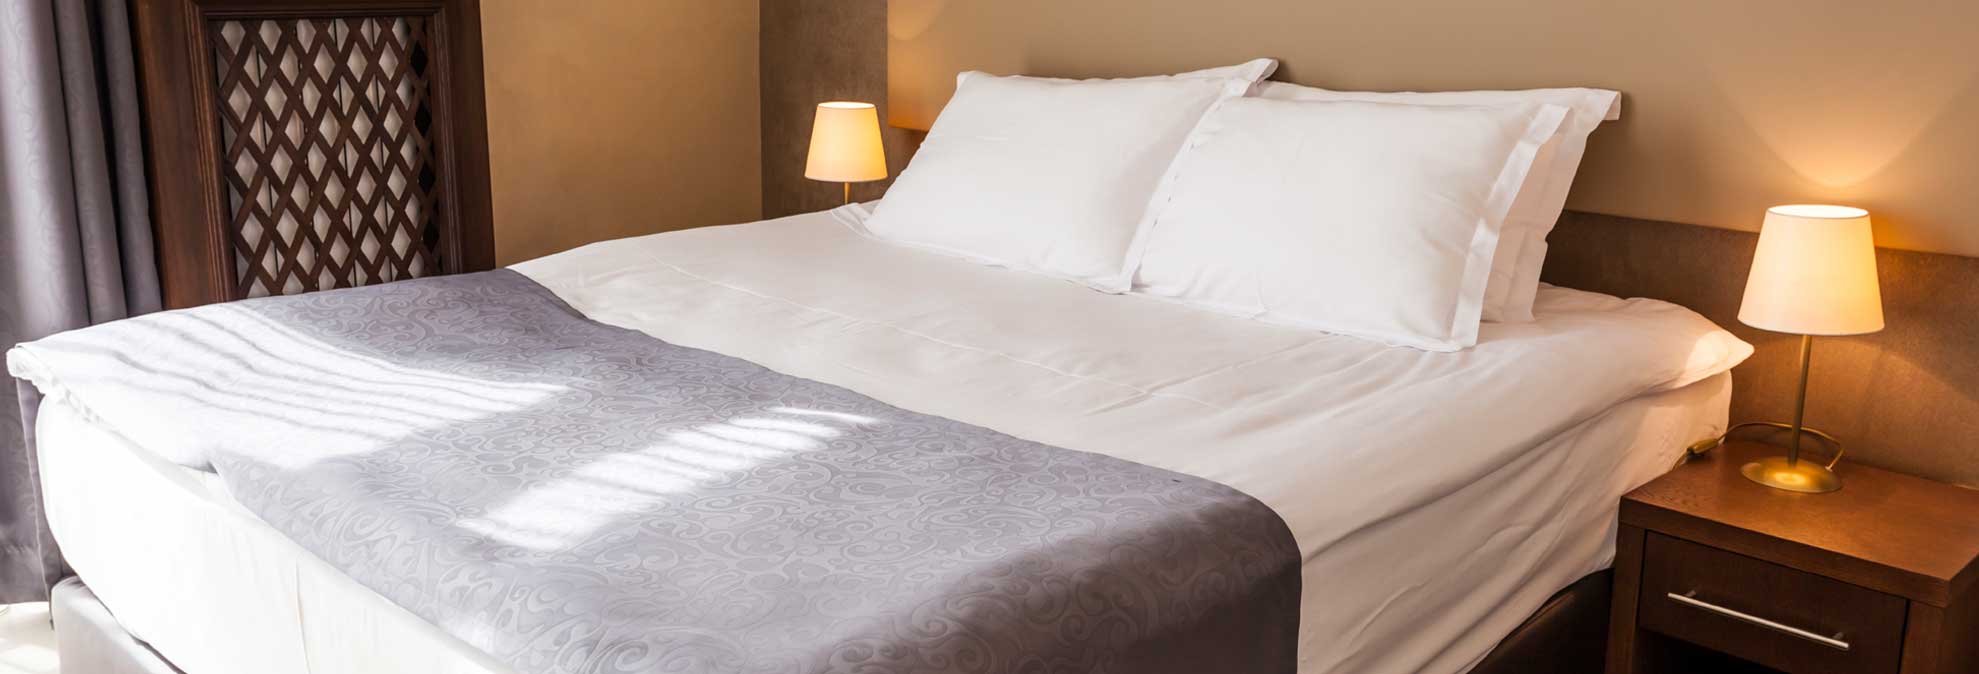 Top 60 of What Kind Of Mattress Toppers Do Hotels Use ...